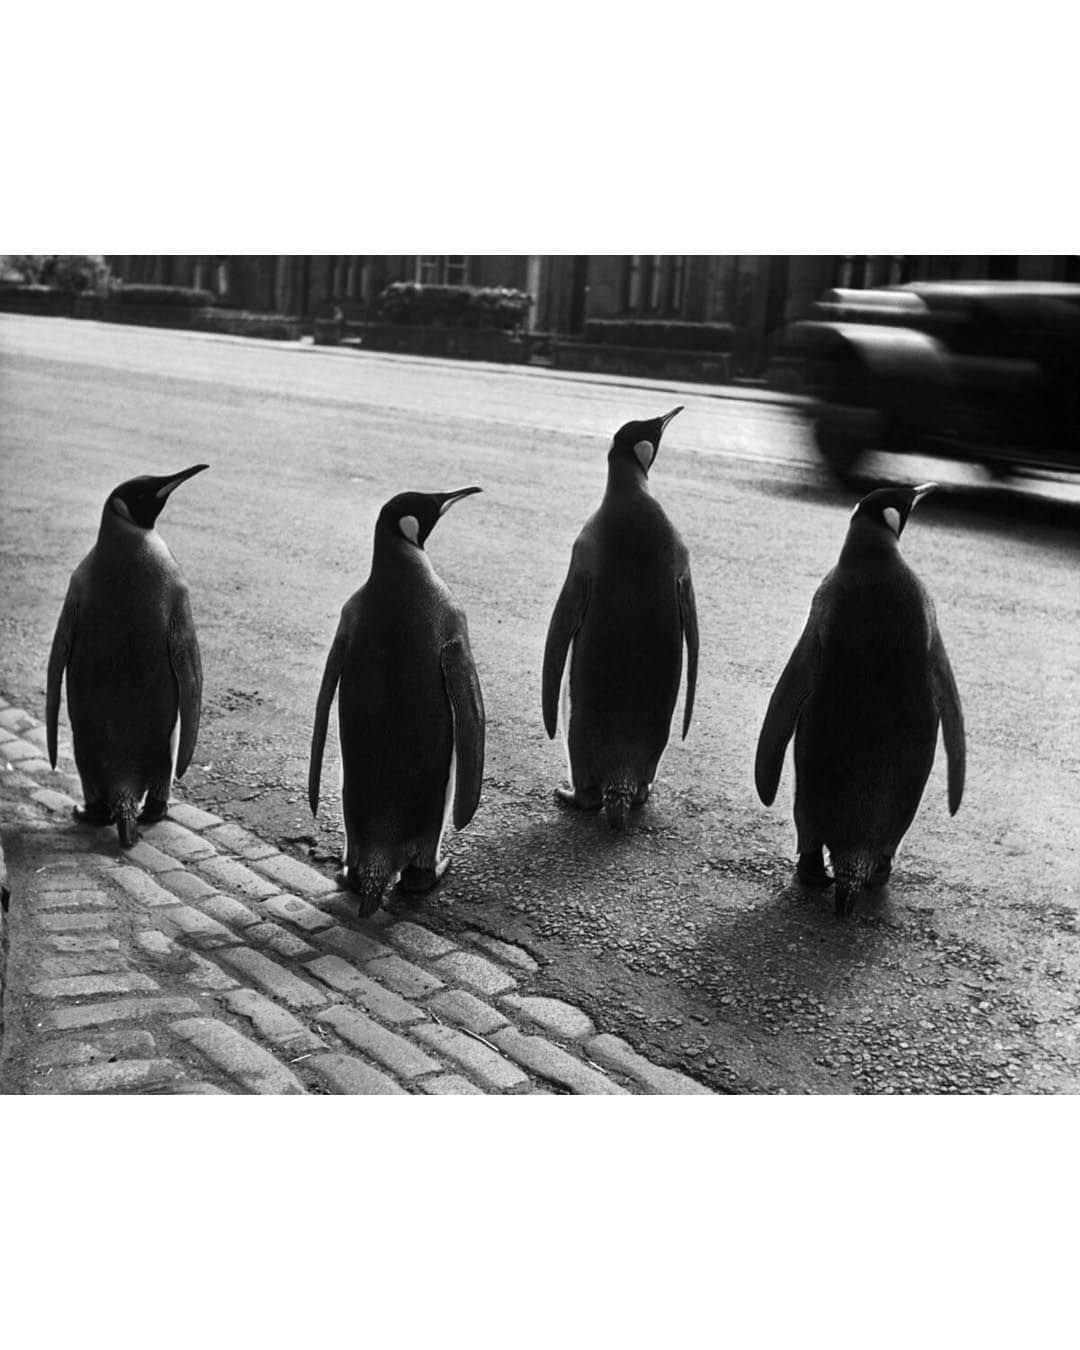 Magnum Photosさんのインスタグラム写真 - (Magnum PhotosInstagram)「In Fine Feather 🐦⁠ ⁠ Birds have been a common theme throughout literature and culture for millennia. More recently, photography has served to immortalize the symbolism of our feathered friends, from grace and humor to peace and hope.⁠ ⁠ @alessandra_sanguinetti's book On the Sixth Day offers us a glimpse of life on a small Argentine farm from the perspective of its animals.⁠ ⁠ A 1948 image from @georgerodgerphotos captures an ostrich emerging from the frame and delivering a cautionary gaze into his lens.⁠ ⁠ During the filming of The Birds, @philippe_halsman_official photographed director Alfred Hitchcock and main actress Tippi Hedren in a playful take on Hitchcock’s macabre vision.⁠ ⁠ Comment your favorite👇⁠ ⁠ PHOTOS (left to right):⁠ ⁠ (1) From the series On the Sixth Day. Ducks in truck. Buenos Aires, Argentina. 2001. © @alessandra_sanguinetti / Magnum Photos⁠ ⁠ (2) Ostrich Farm. South Africa. 1948. © @georgerodgerphotos / Magnum Photos⁠ ⁠ (3) Miskito children. Puerto Cabezas, Nicaragua. 1992. © Alex Webb (@webb_norriswebb) / Magnum Photos⁠ ⁠ (4) Penguins from the zoo taking their weekly walk. The director of the zoo walks them through the city every week in order to attract people to the zoo. Edinburgh, Scotland. 1950. © @wernerbischofestate / Magnum Photos ⁠ ⁠ (5) Market. Tashkent, Uzbekistan. 1992. © Gueorgui @pinkhassov / Magnum Photos⁠ ⁠ (6) The American actress Tippi Hedren in The Birds by Alfred Hitchcock. USA. 1962. © @philippe_halsman_official / Magnum Photos⁠ ⁠ (7) Emus running through a caravan park. The white surface is made up of crushed shells. Highway One, Denham, Western Australia. 2006. © Trent Parke (@chillioctopus) / Magnum Photos⁠ ⁠ (8) Kyoto, Japan. 2019. © @paolopellegrin / Magnum Photos⁠ ⁠ (9) Lake Garda, Italy. 1999. © @martinparrstudio / Magnum Photos⁠ ⁠ (10) Three ducklings adopted by a hen. Loiret département, France. 1989. © Martine Franck / Magnum Photos」11月25日 1時02分 - magnumphotos